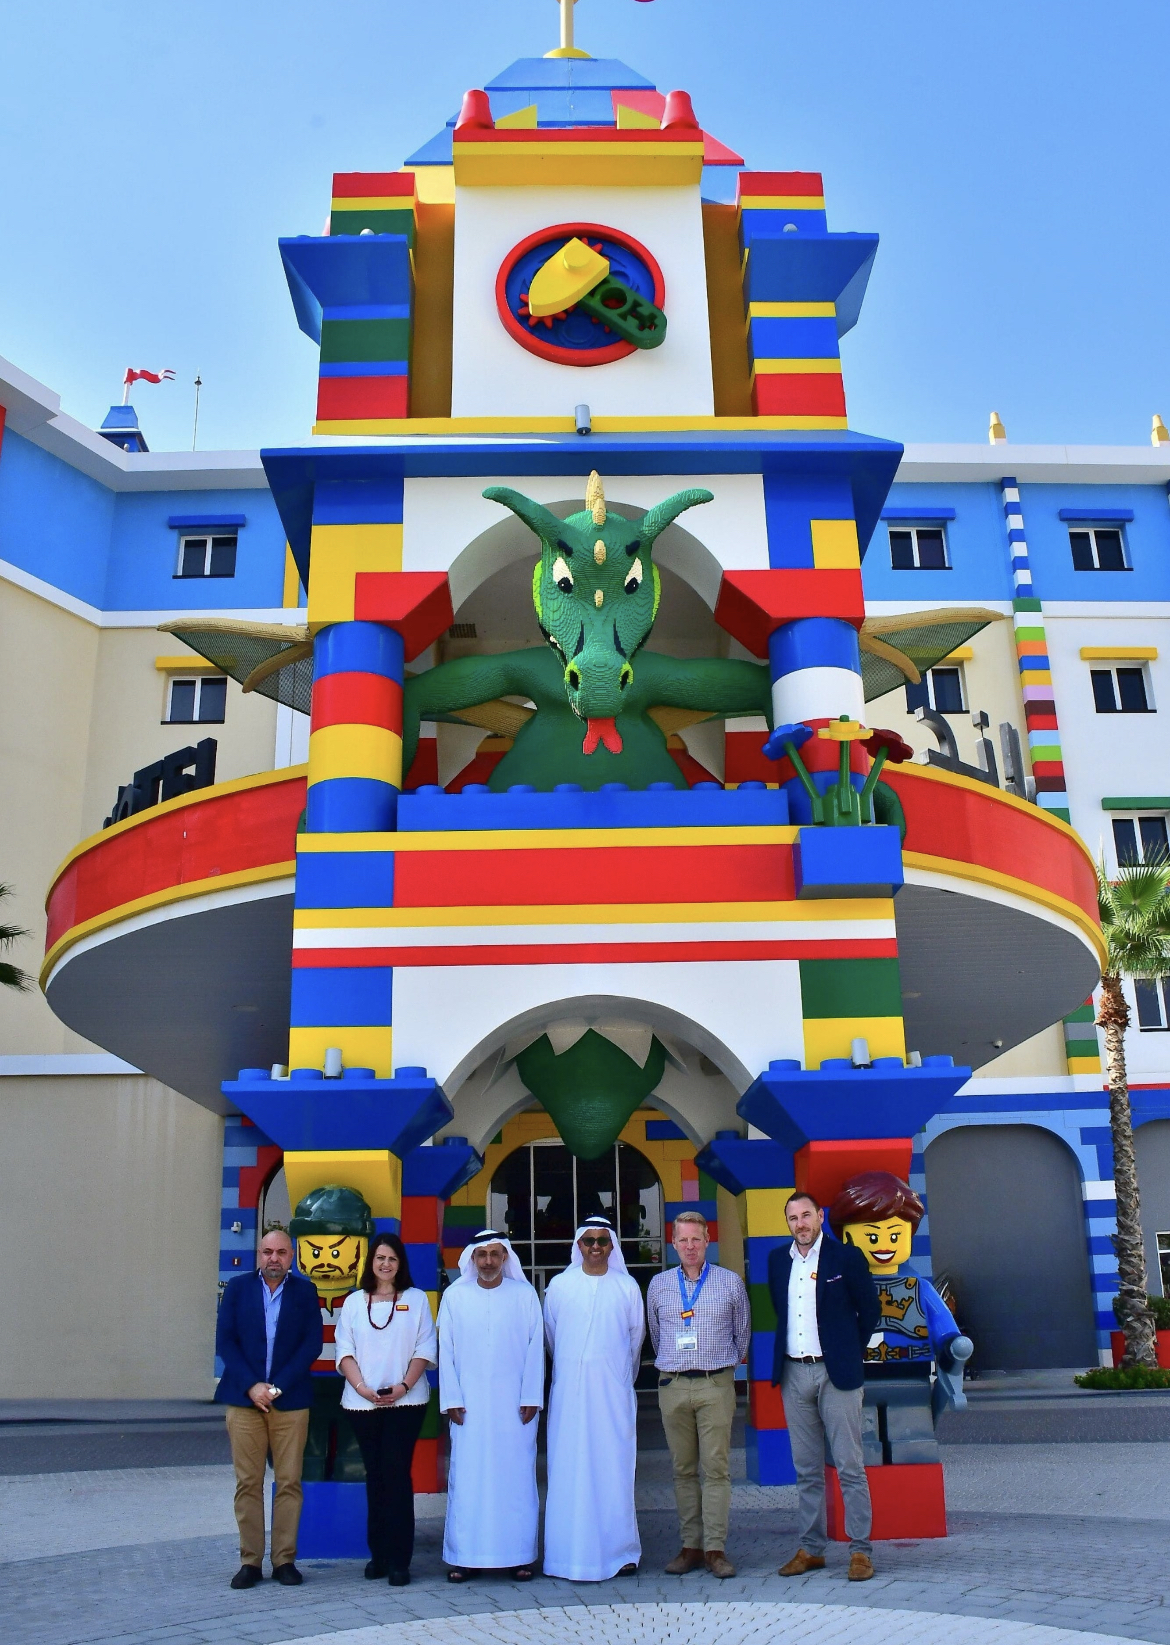 A joint collaboration between the Emirates Journalists Association and Legoland Dubai Resort